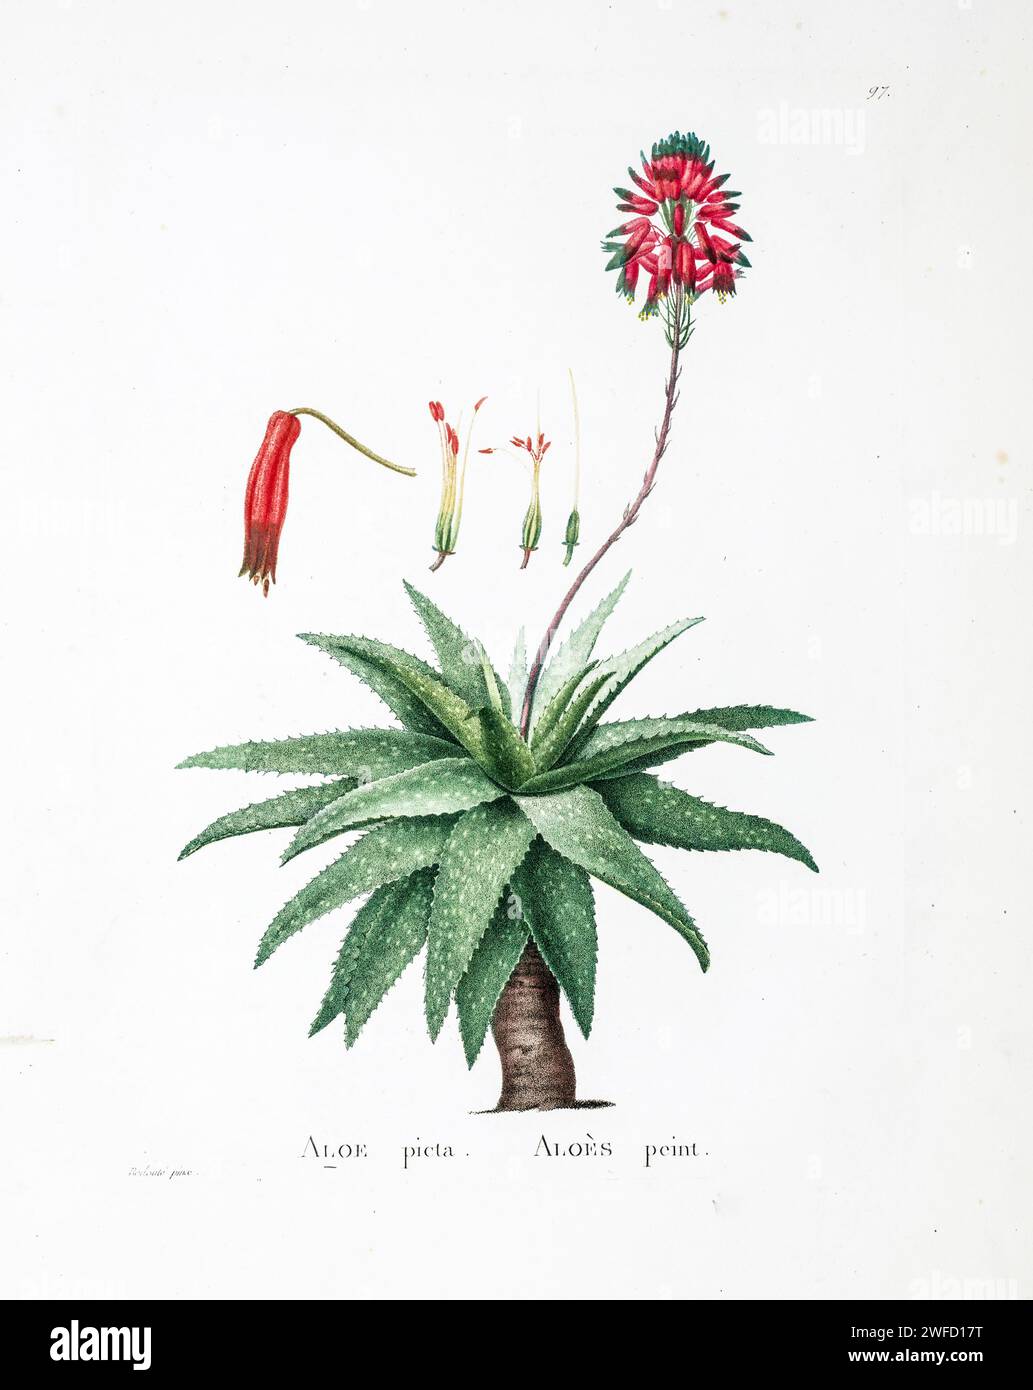 Aloe saponaria (Ait.) Haw. Here As Aloe picta from History of Succulent Plants [Plantarum historia succulentarum / Histoire des plantes grasses] painted by Pierre-Joseph Redouté and described by Augustin Pyramus de Candolle 1799 Aloe maculata, the soap aloe or zebra aloe, is a Southern African species of aloe. Local people in South Africa know it informally as the Bontaalwyn in Afrikaans, or lekhala in the Sesotho language. Stock Photo